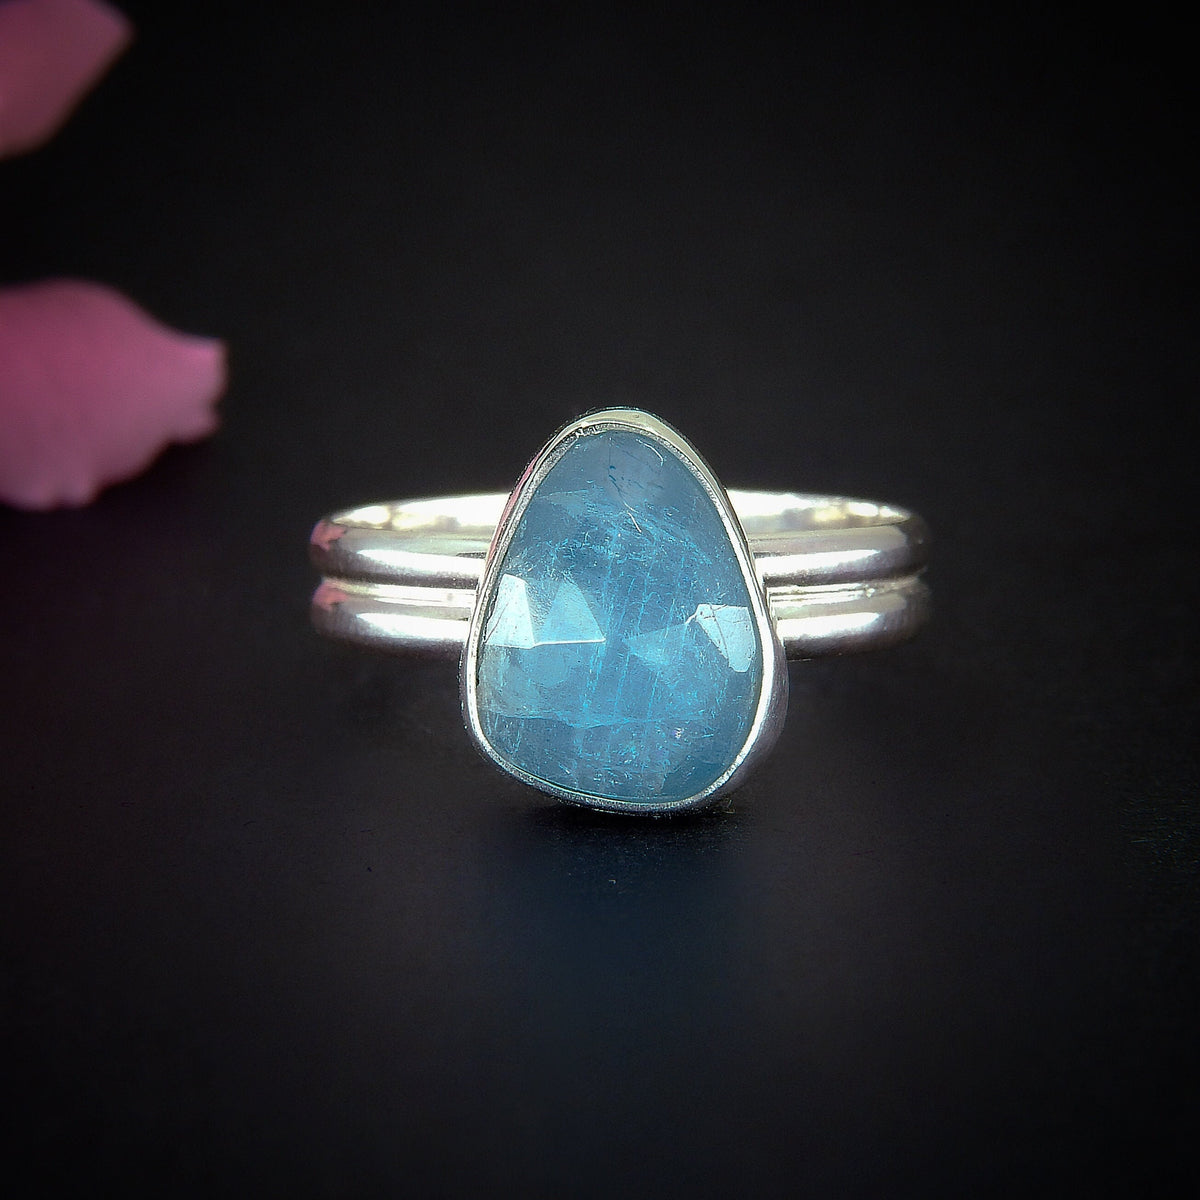 Rose Cut Aquamarine Ring - Size 10 1/4 - Sterling Silver - Aquamarine Jewellery - Blue Aquamarine Ring - Unique Aquamarine Statement Ring